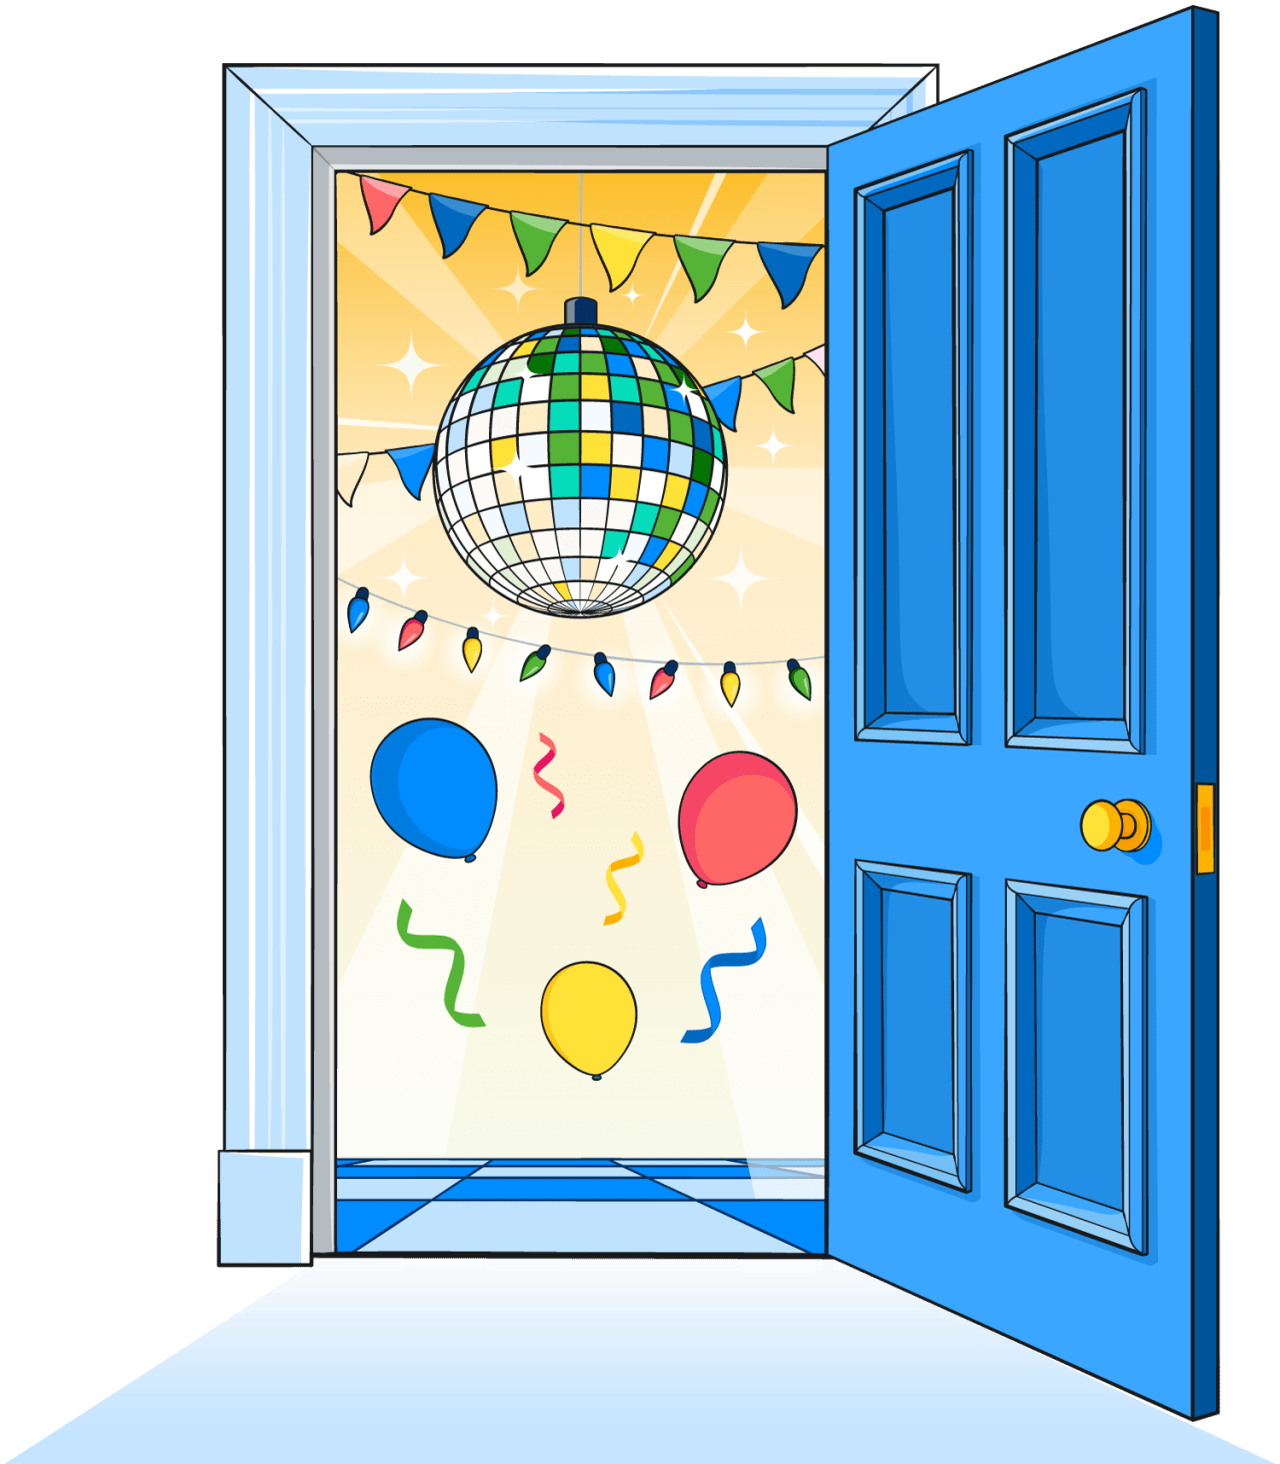 Illustration of an open door through to a room with a tiled floor of alternating blue and light blue squares. A disco ball, bunting, and lights hang from the ceiling, balloons, lights, and confetti float through the air. The room is filled with warm yellow light and looks inviting from the outside.